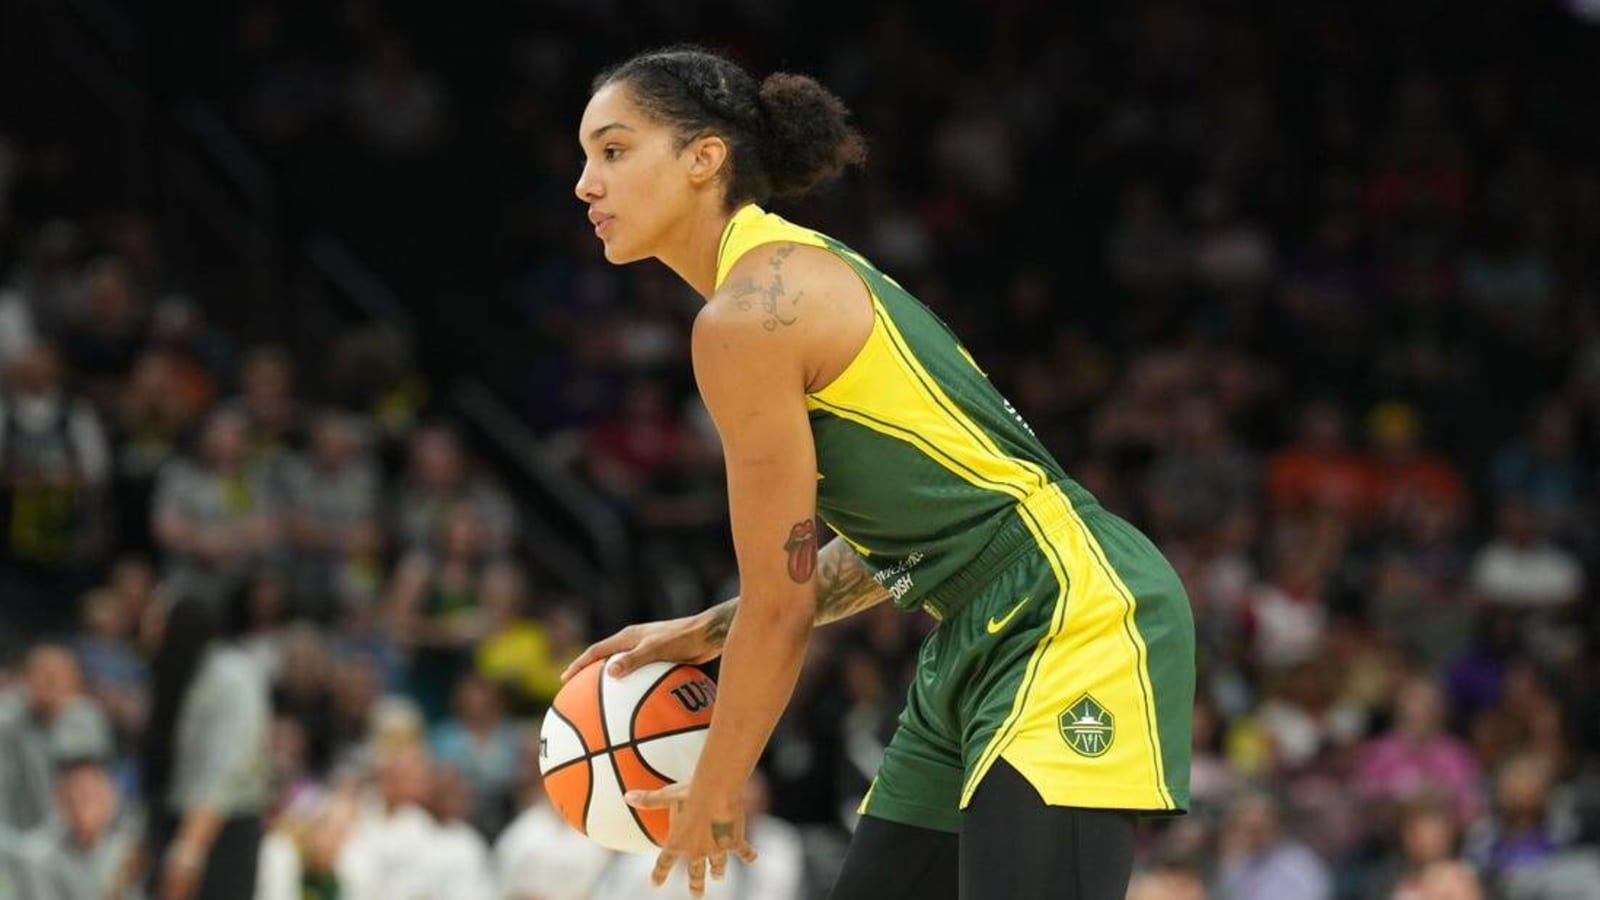 Storm F Gabby Williams (foot) sidelined 4 to 6 weeks